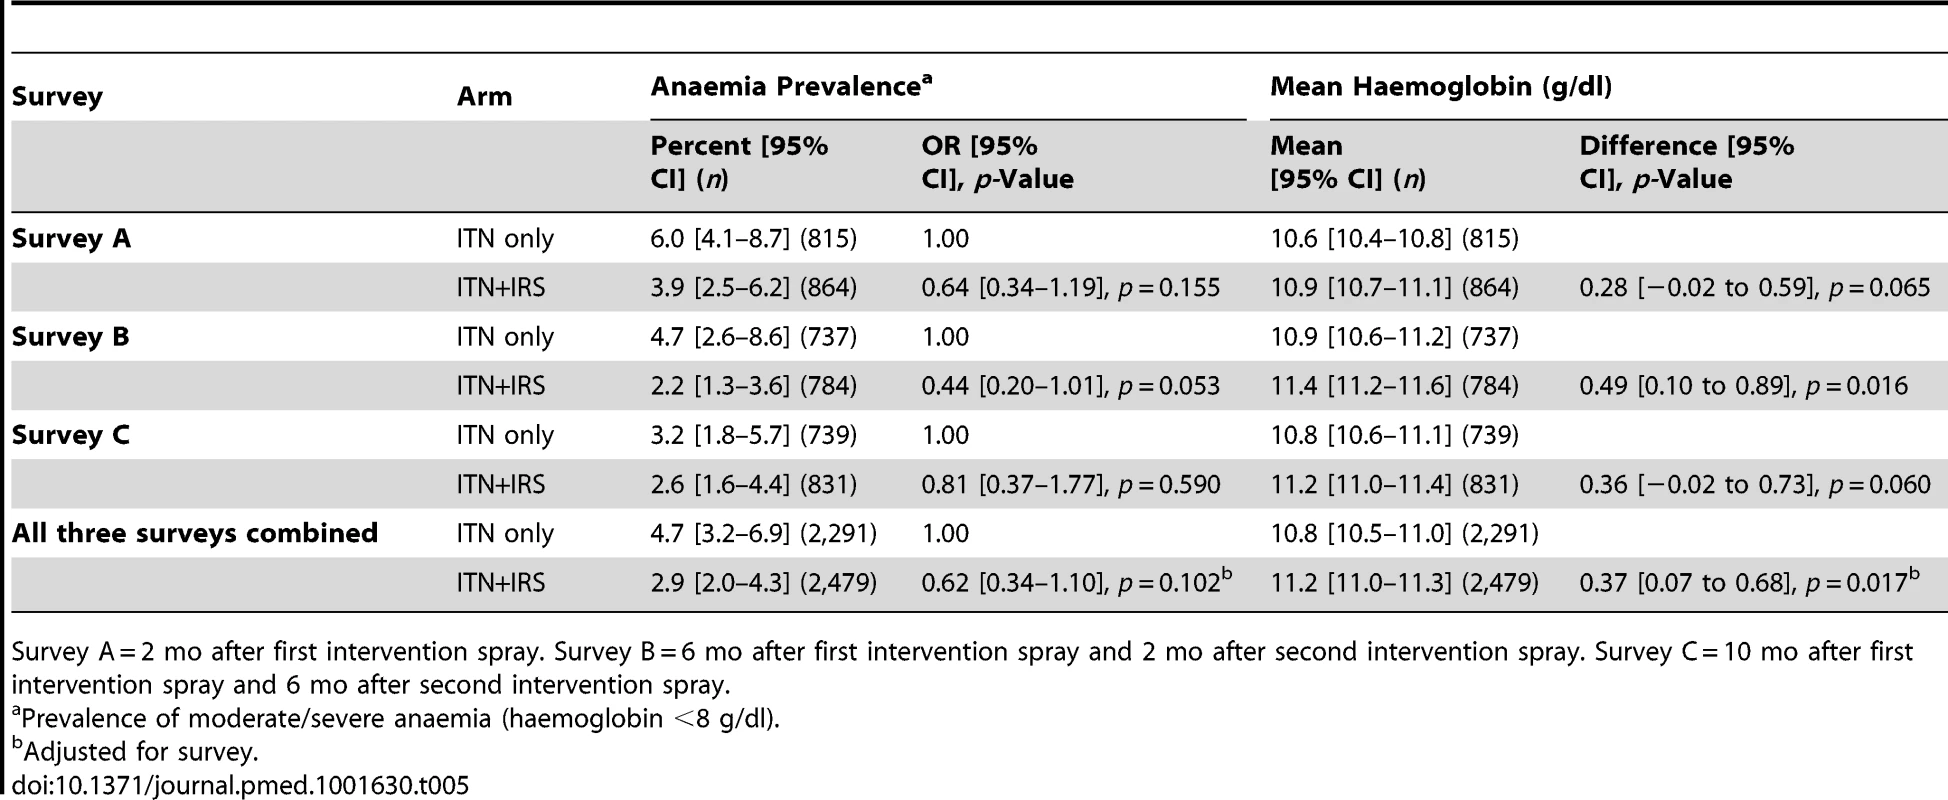 Anaemia and mean haemoglobin in children under 5+IRS arms (intention to treat), for survey A, B, and C, Muleba District, Tanzania, 2012.